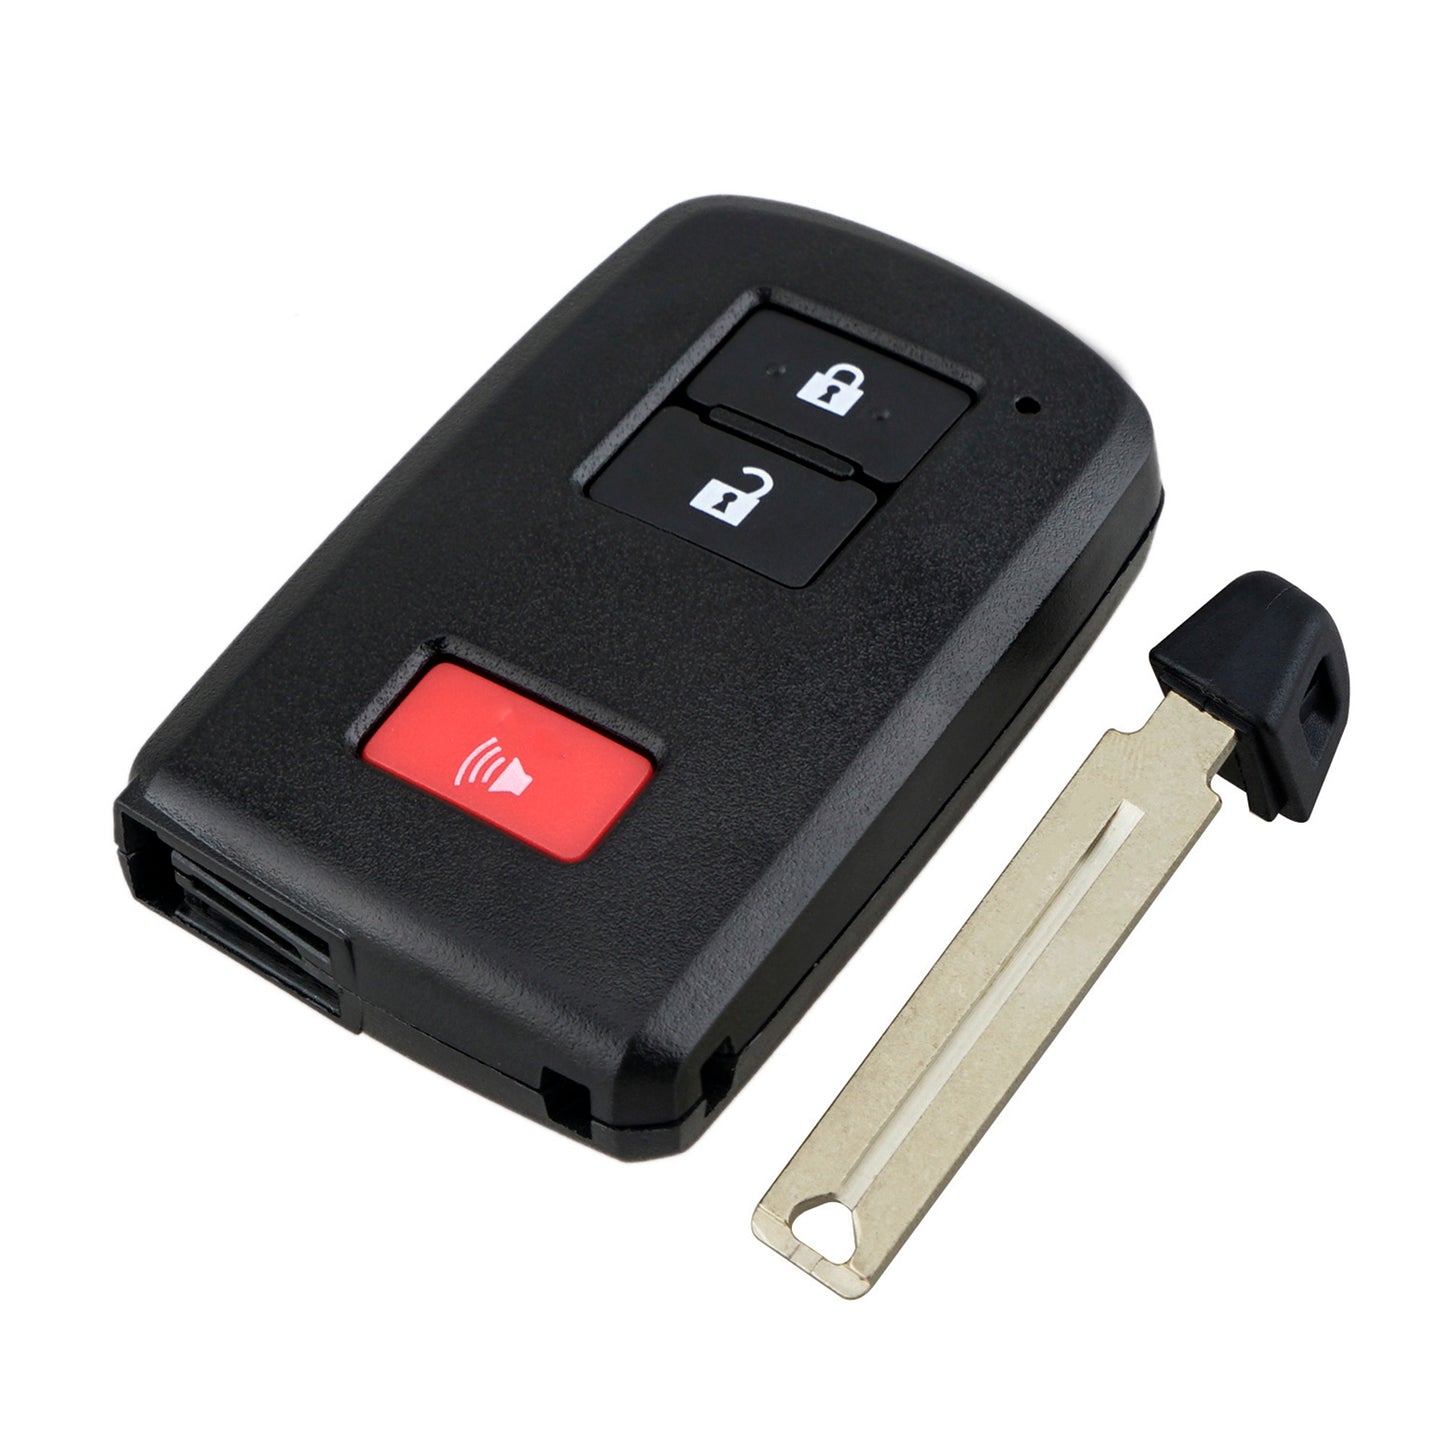 3 Buttons 314.3MHz Smart Prox Key Entry Car Fob Keyless Remote Key For 2012-2021 Toyota Land Cruiser Tacoma Highlander Prius C Sequoia Tundra 4Runner FCC ID : HYQ14FBA SKU : H532